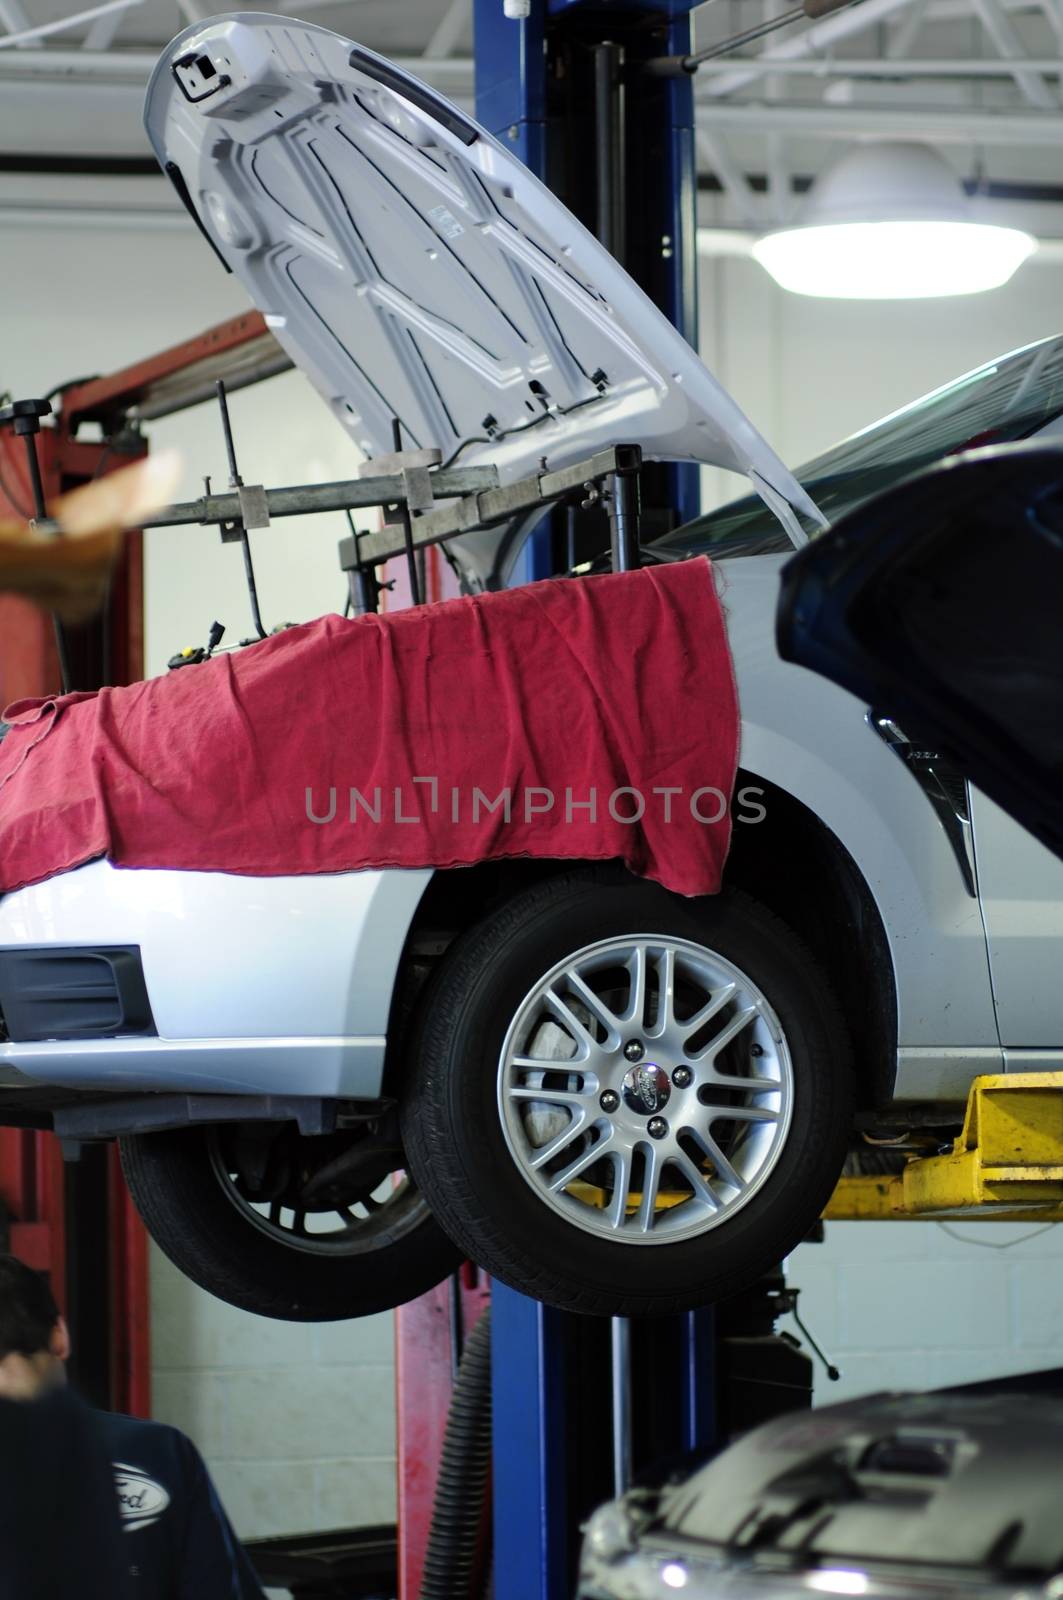 Auto Service. Repairing Vehicle in the Auto Service. Vertical Photo